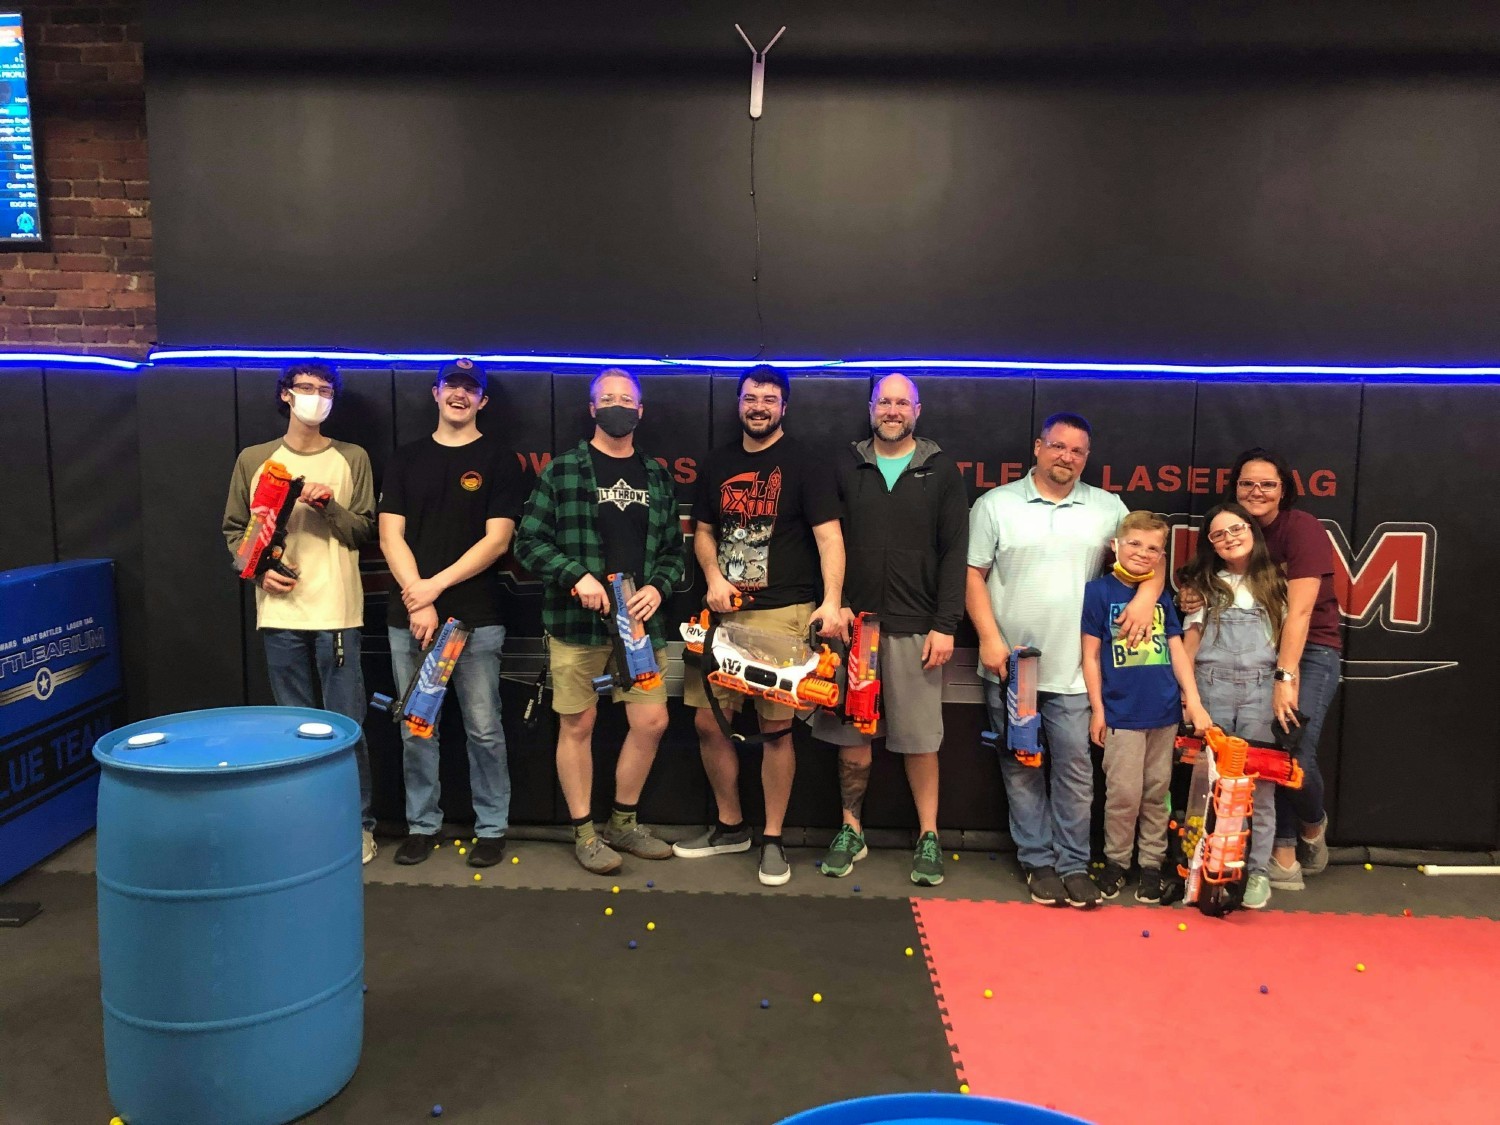 Laser sharp team - Office outing to laser tag